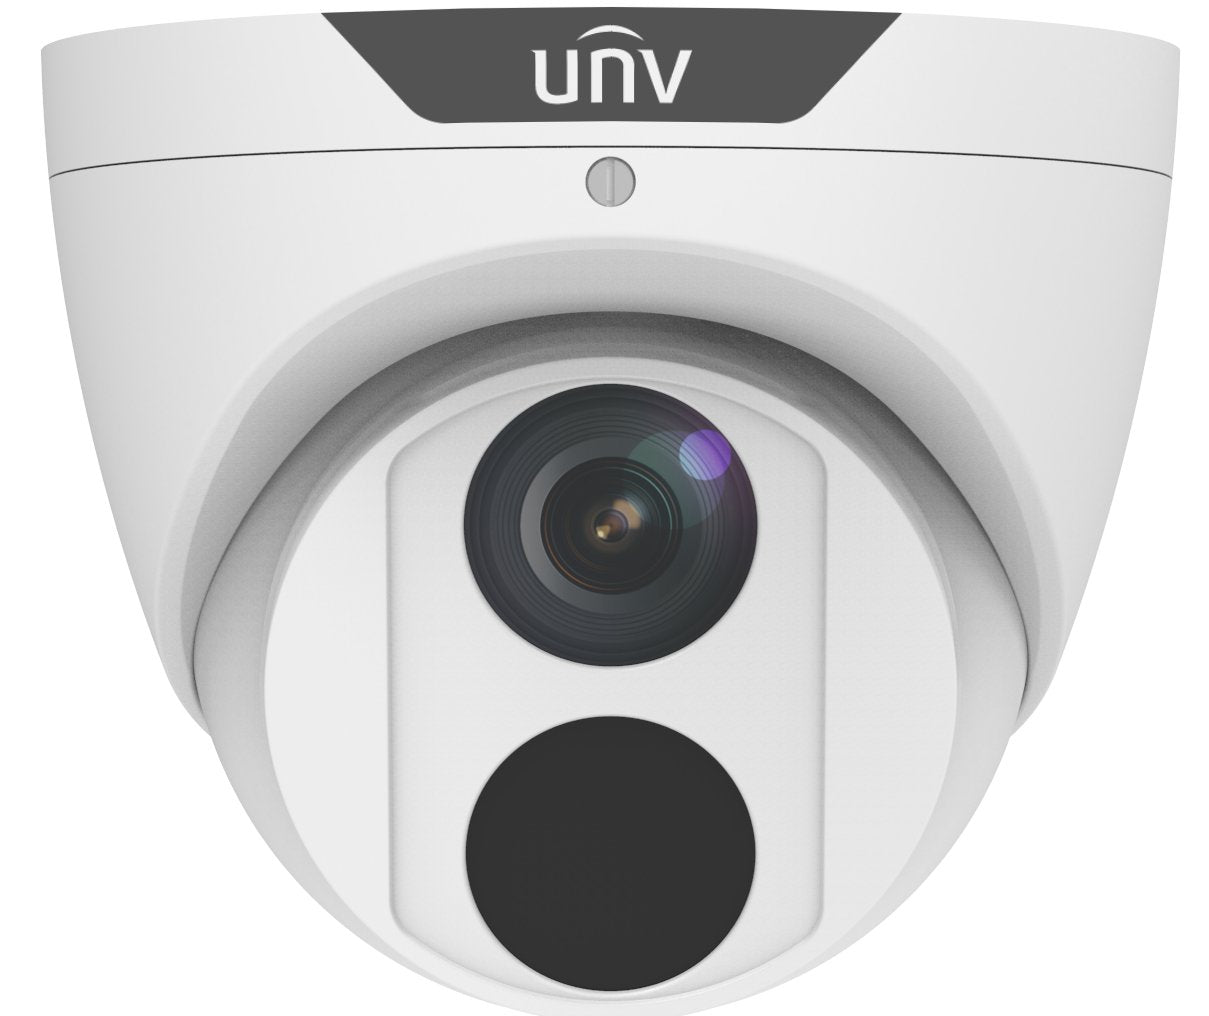 **REFURB** Uniview 8MP IP Easy AI Series IR Turret Camera, Human Body Detection, EasyStar, 2.8mm, 120dB WDR, 30m IR, Twin Streams, Built-in Mic, POE or 12VDC, IP67 (Wall Mount: TR-WM03-D-IN, Junction Box: TR-JB03-G-IN) (6 Months Warranty - SN: TBA)